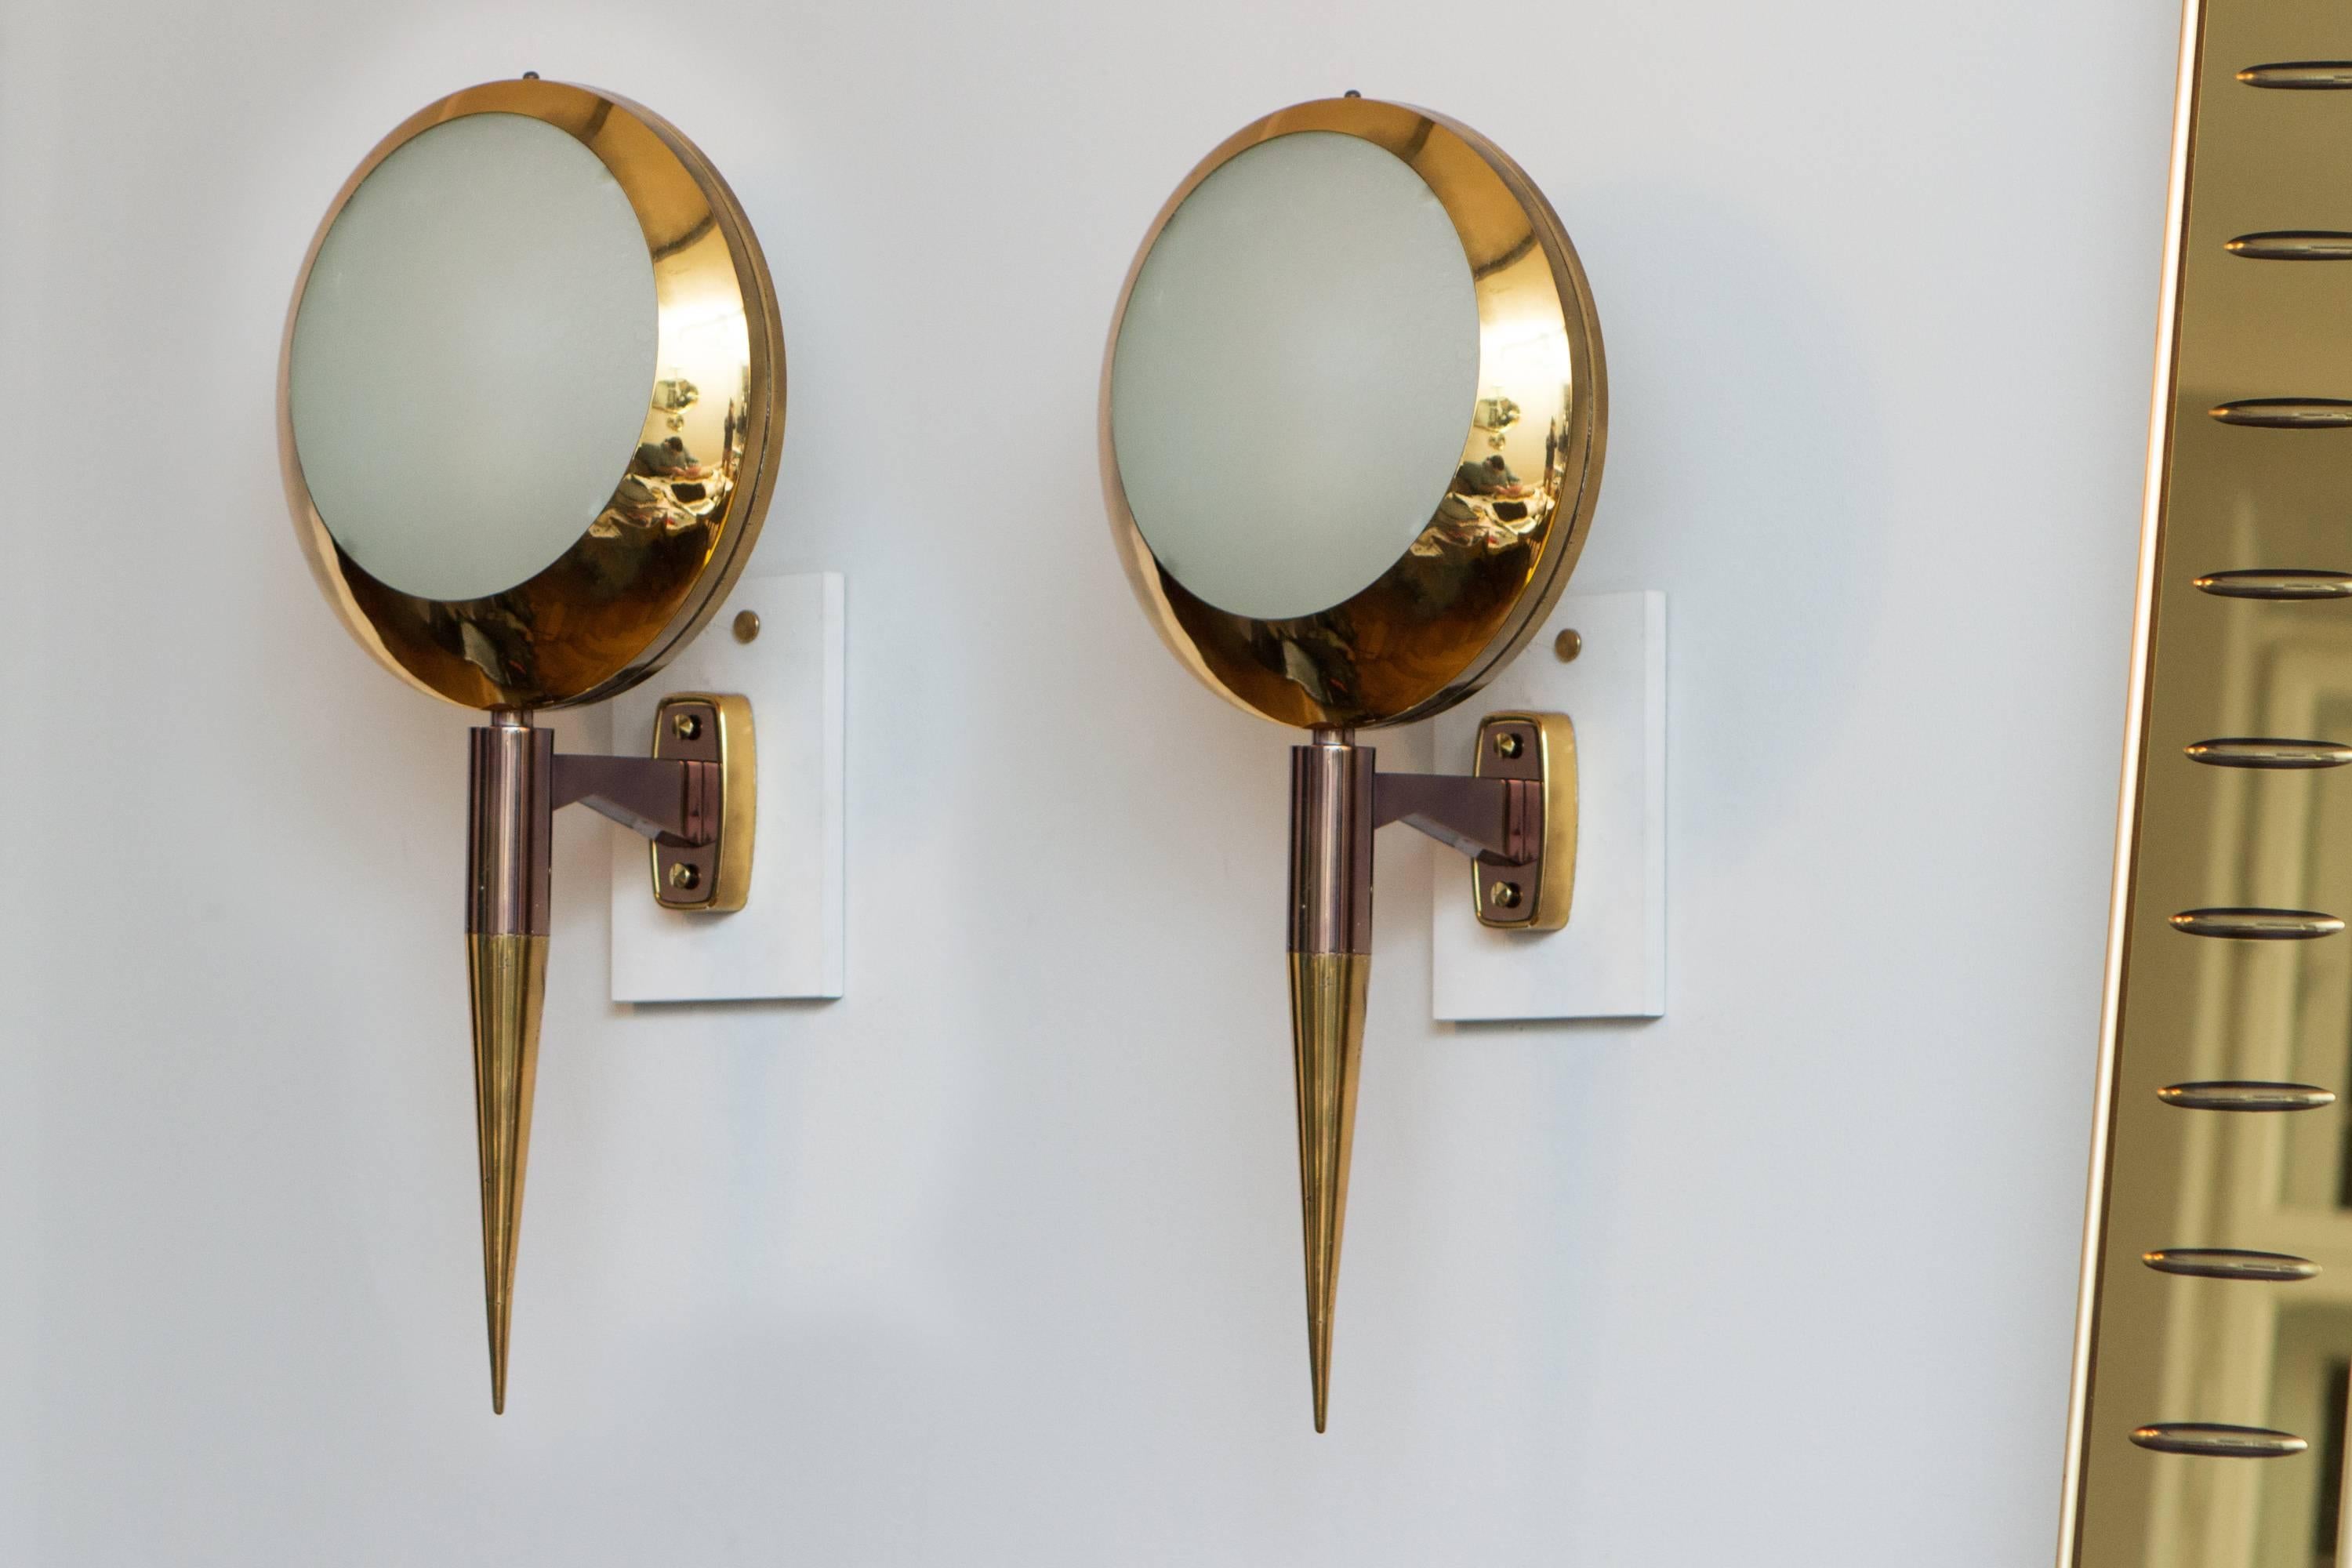 Pair of elegant wall sconces by Stilnovo, model 2128, Italy circa 1960, brass and colored metal, frosted glass frontside and backside, rotatable, inside signed with a Stilnovo sticker. Perfect condition.